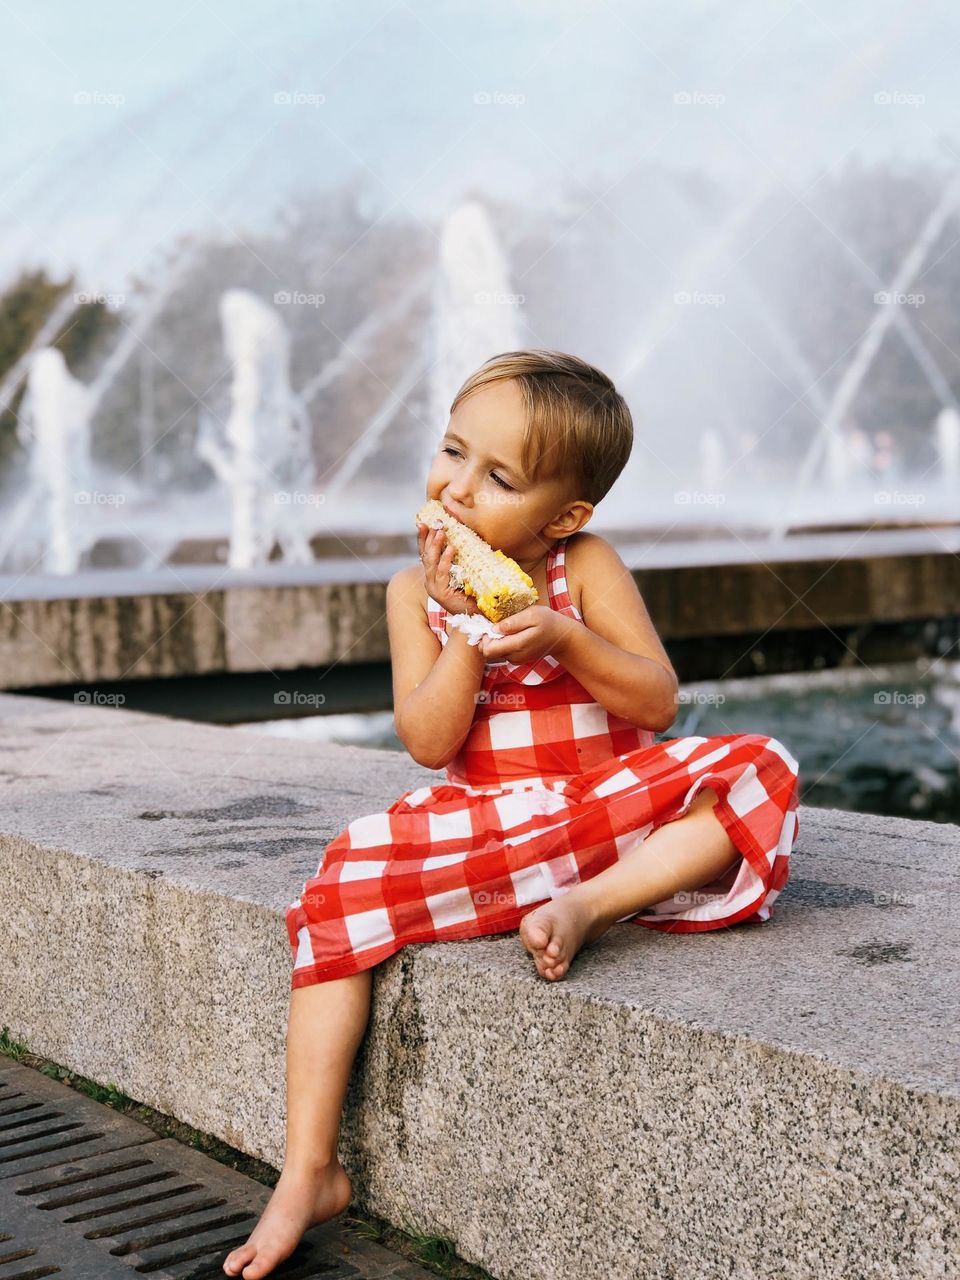 Cute little girl with short blonde hair wearing red dress sitting near fountains and eating corn, portrait of child 